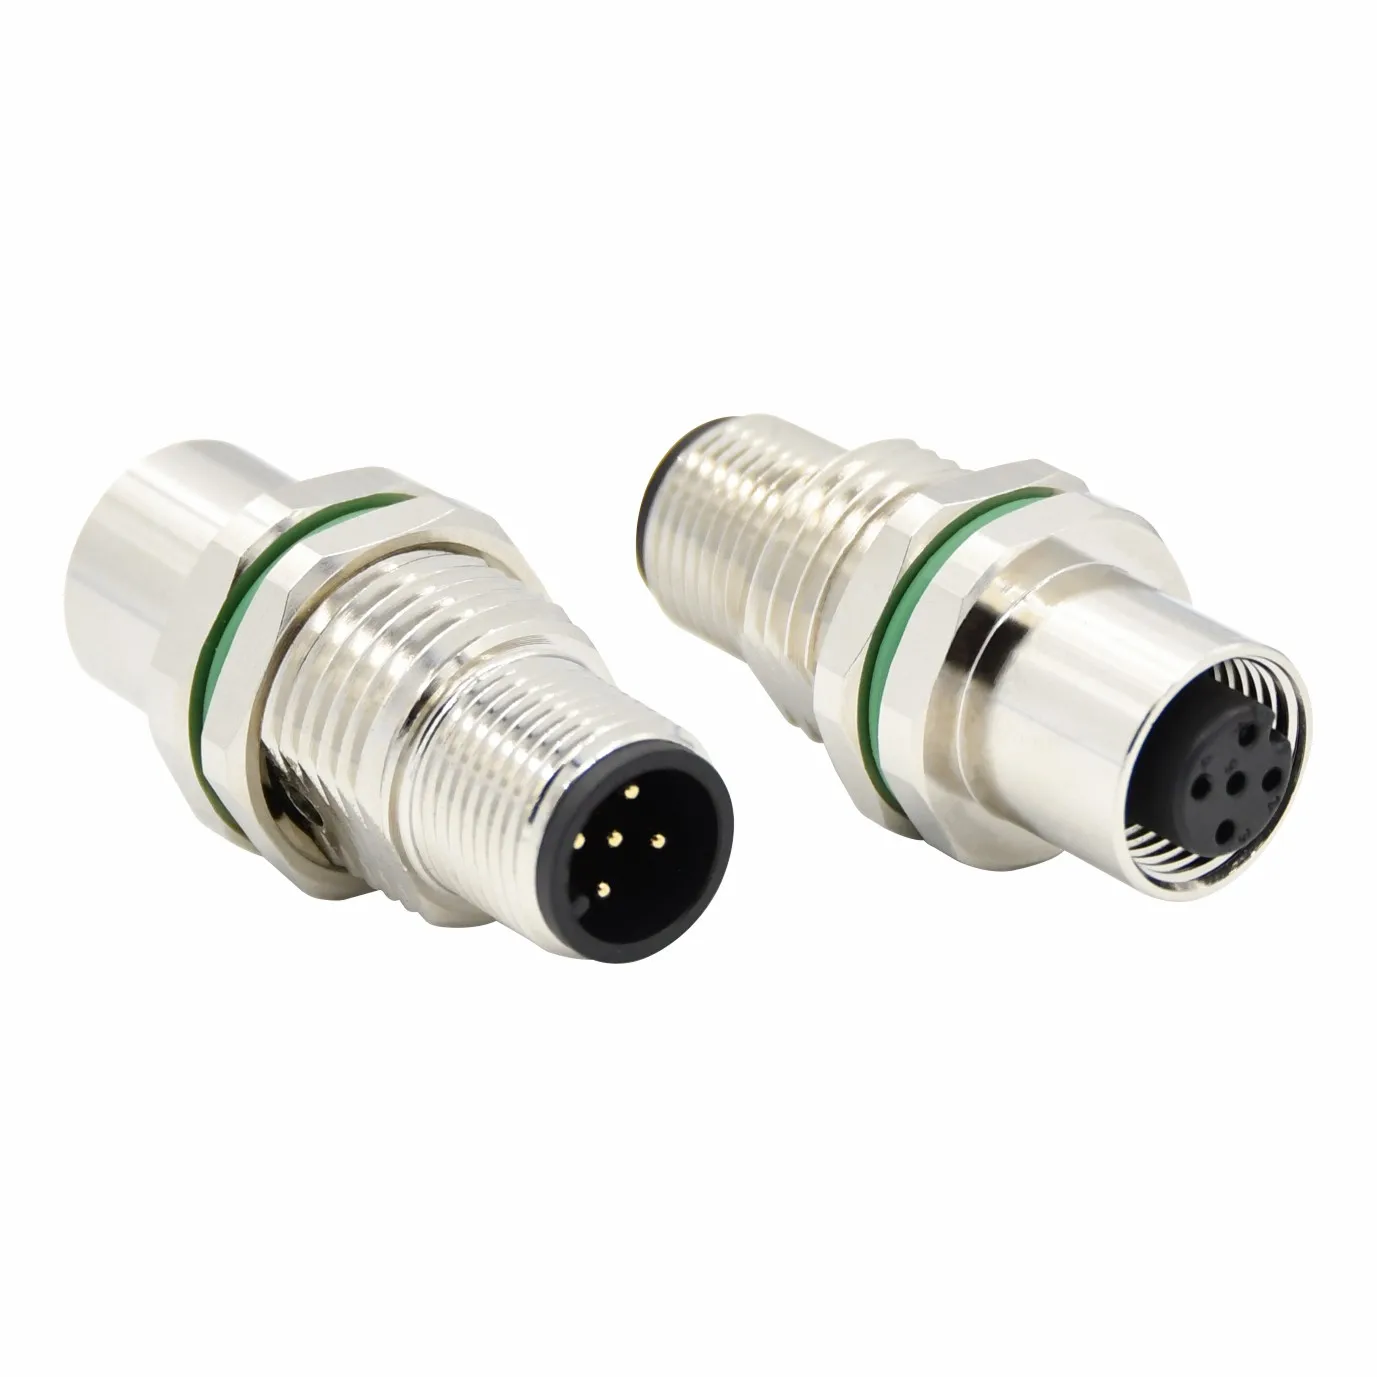 M12 panel mount connector 4 5 Pin Male Female M12 Plug to 5 Pole Socket Adapter M12 panel through connector